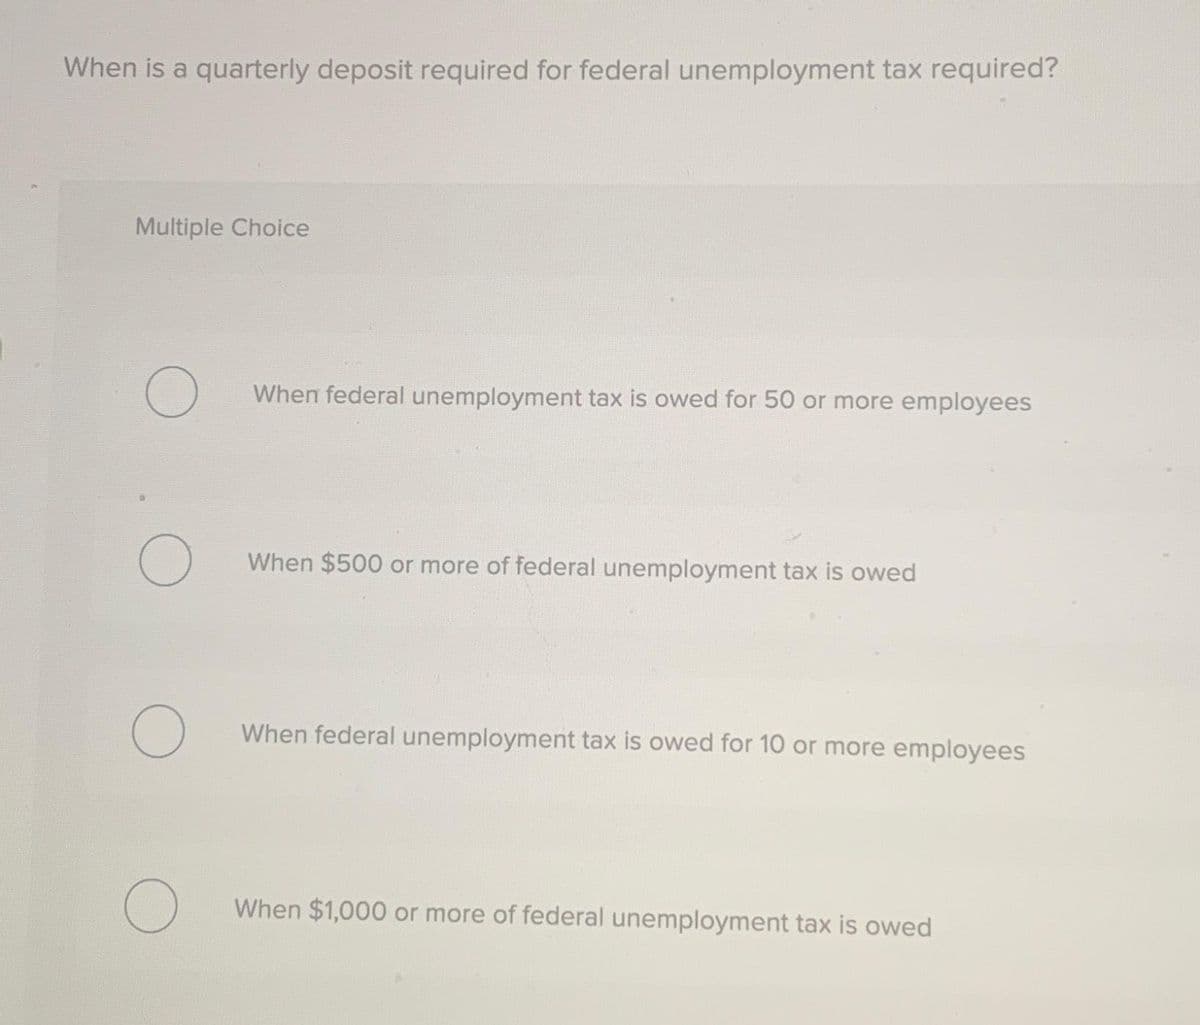 When is a quarterly deposit required for federal unemployment tax required?
Multiple Choice
O
O
O
O
When federal unemployment tax is owed for 50 or more employees
When $500 or more of federal unemployment tax is owed
When federal unemployment tax is owed for 10 or more employees
When $1,000 or more of federal unemployment tax is owed